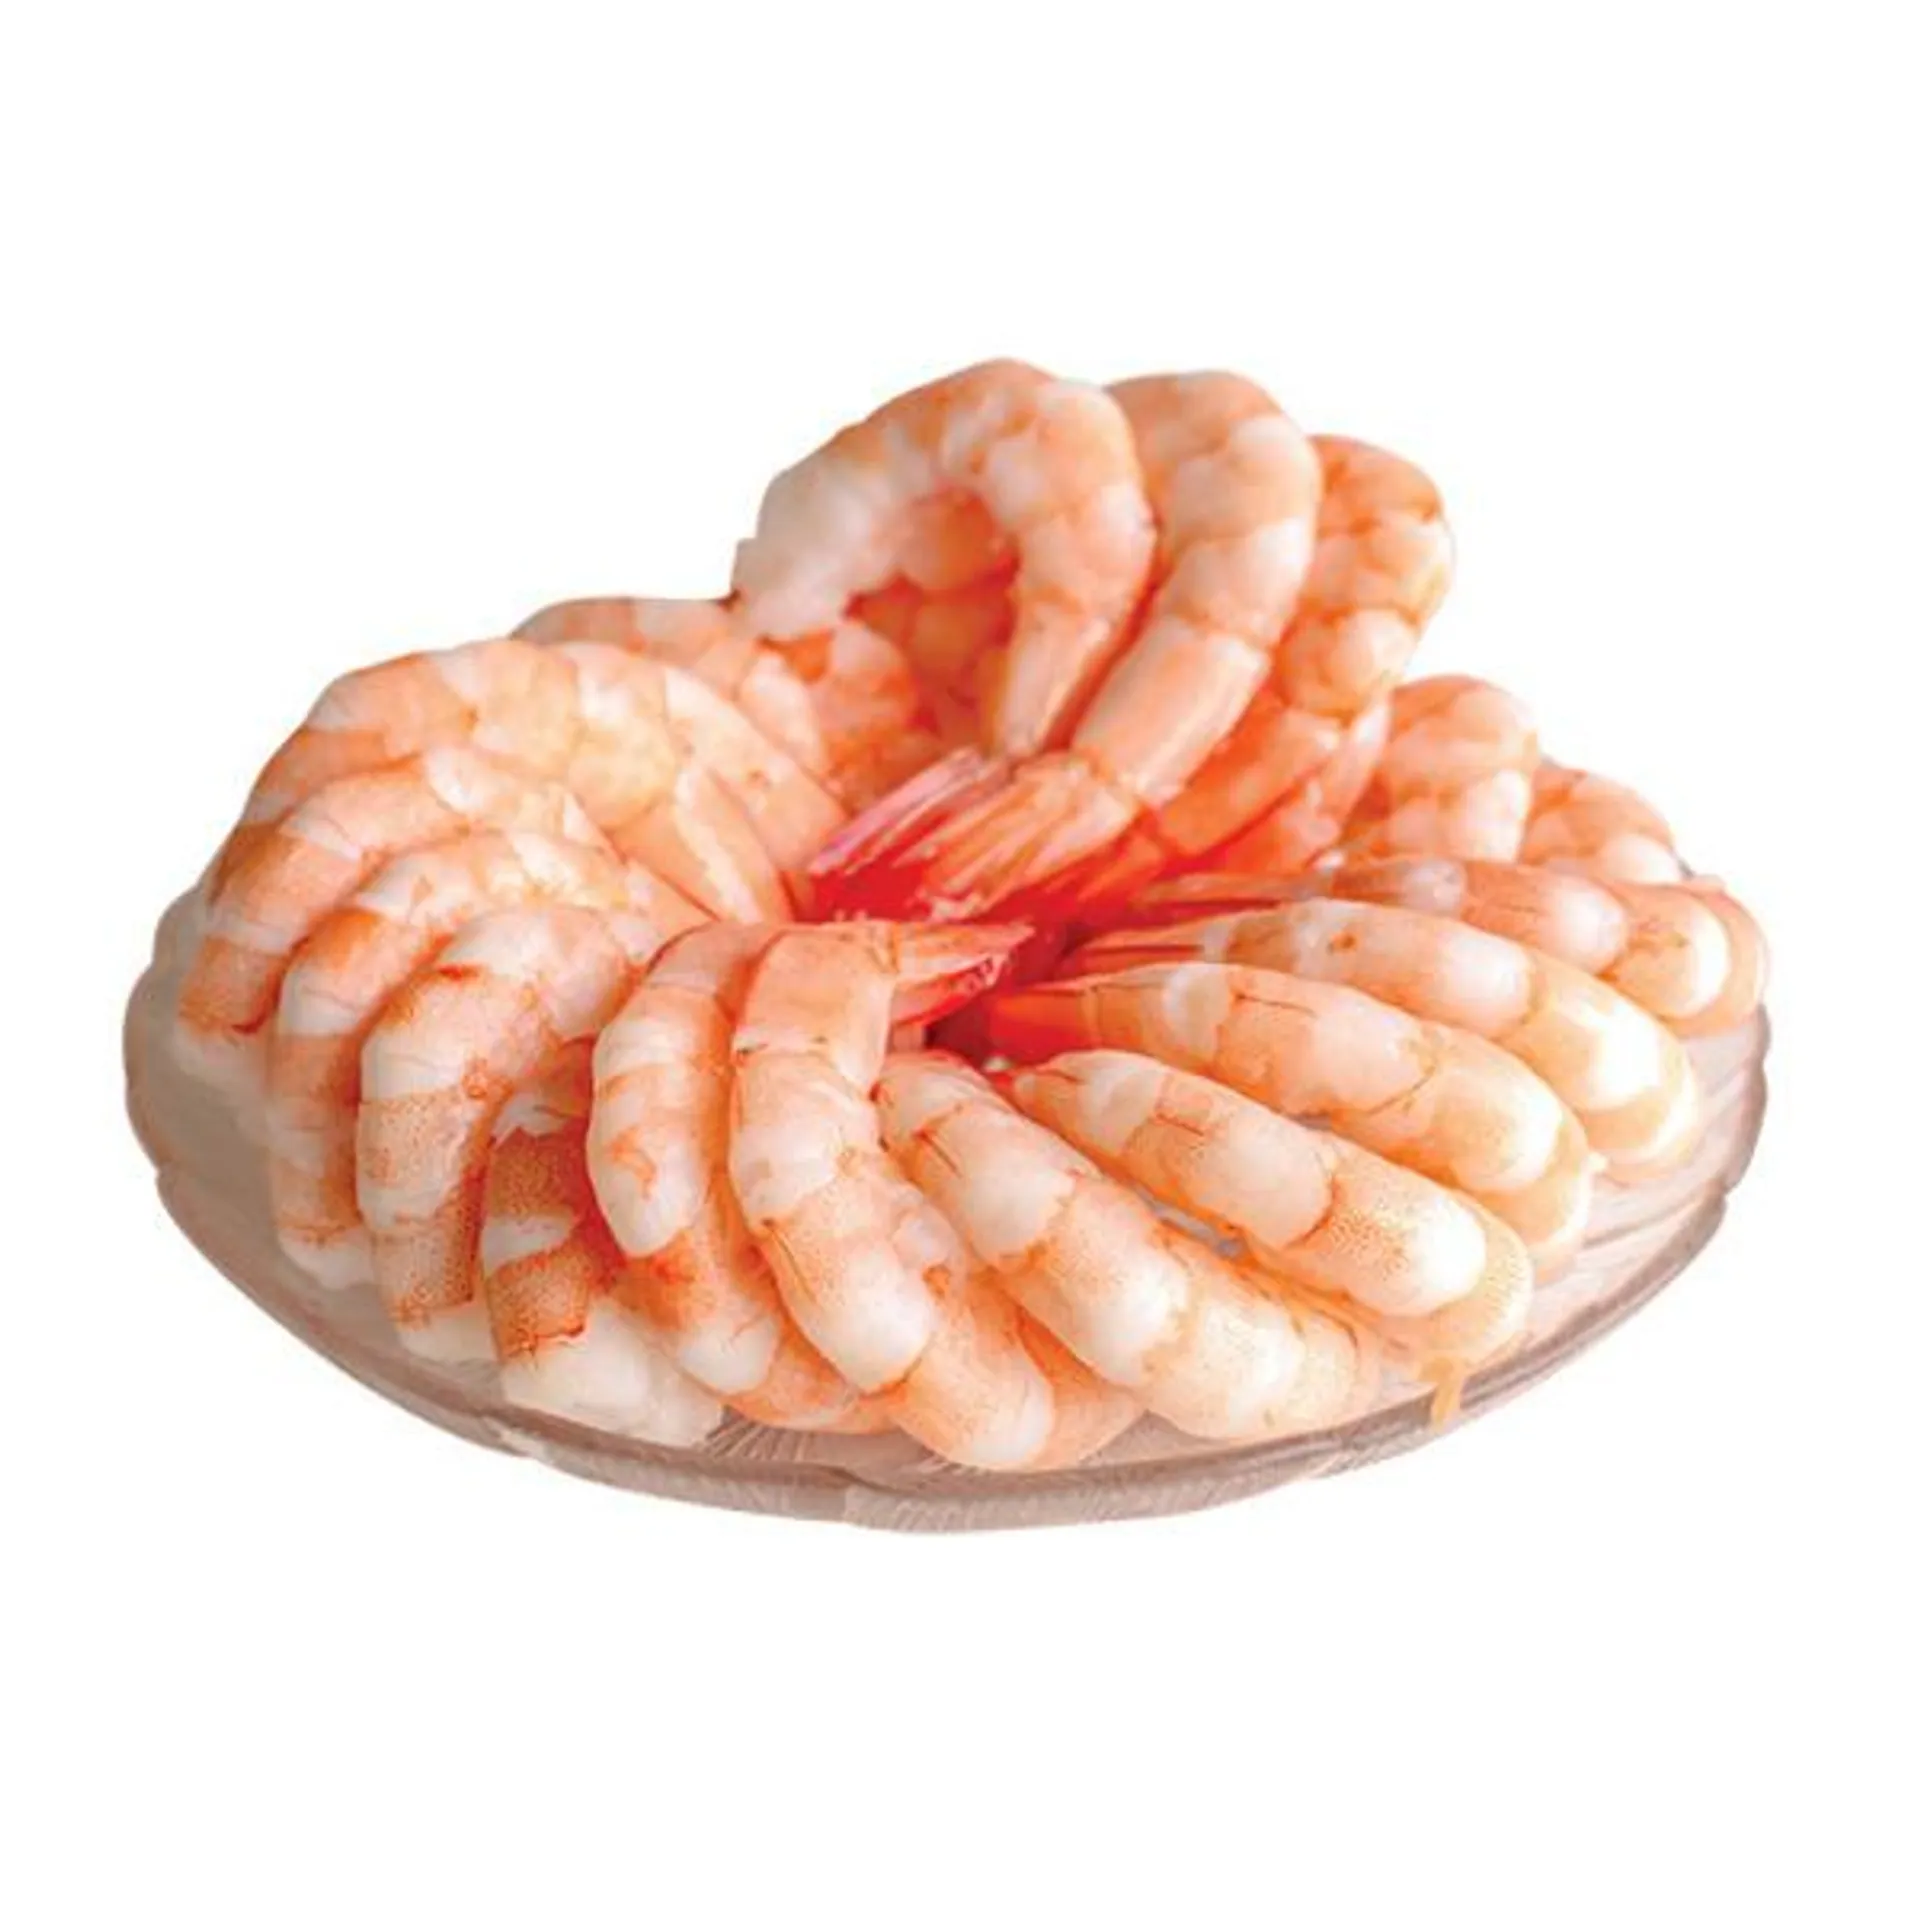 Free From 26/30 Cooked Shrimp Peeled Tail - 1 Pound